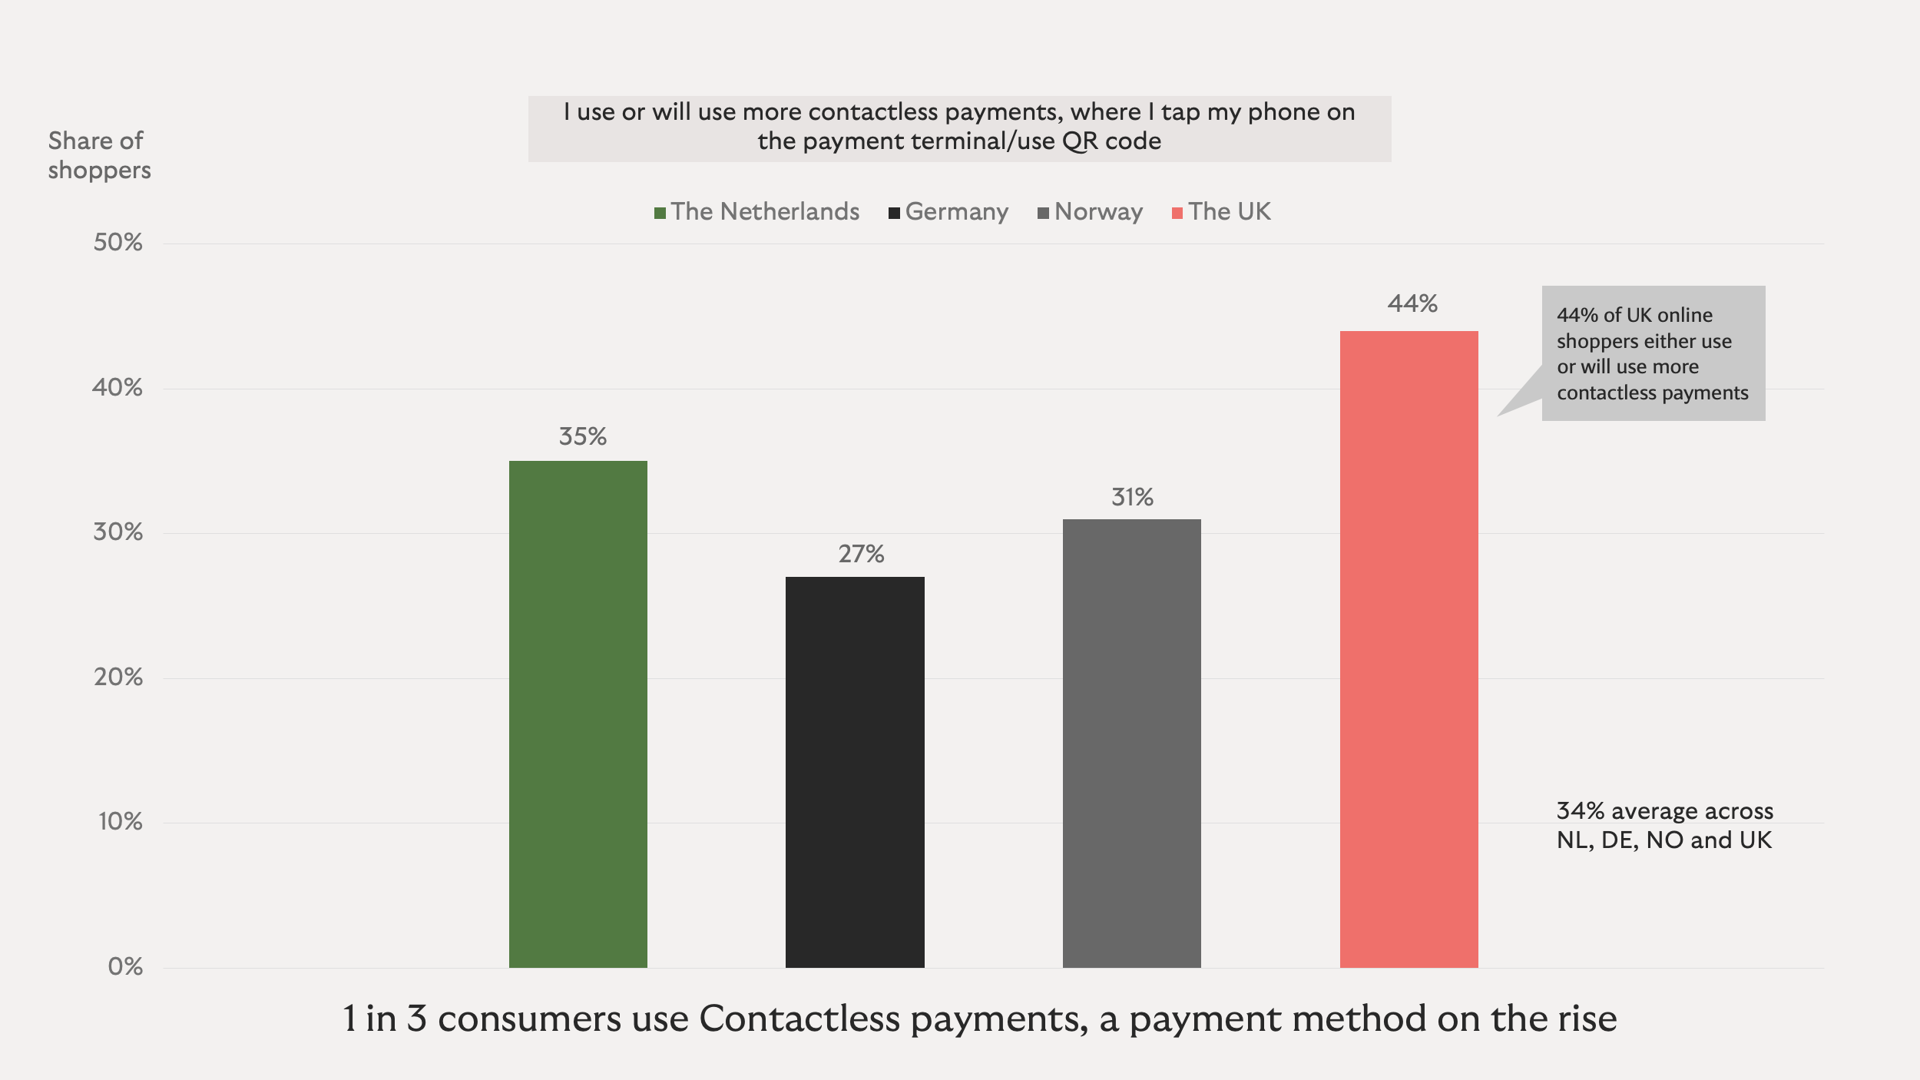 Contactless payments take a flight